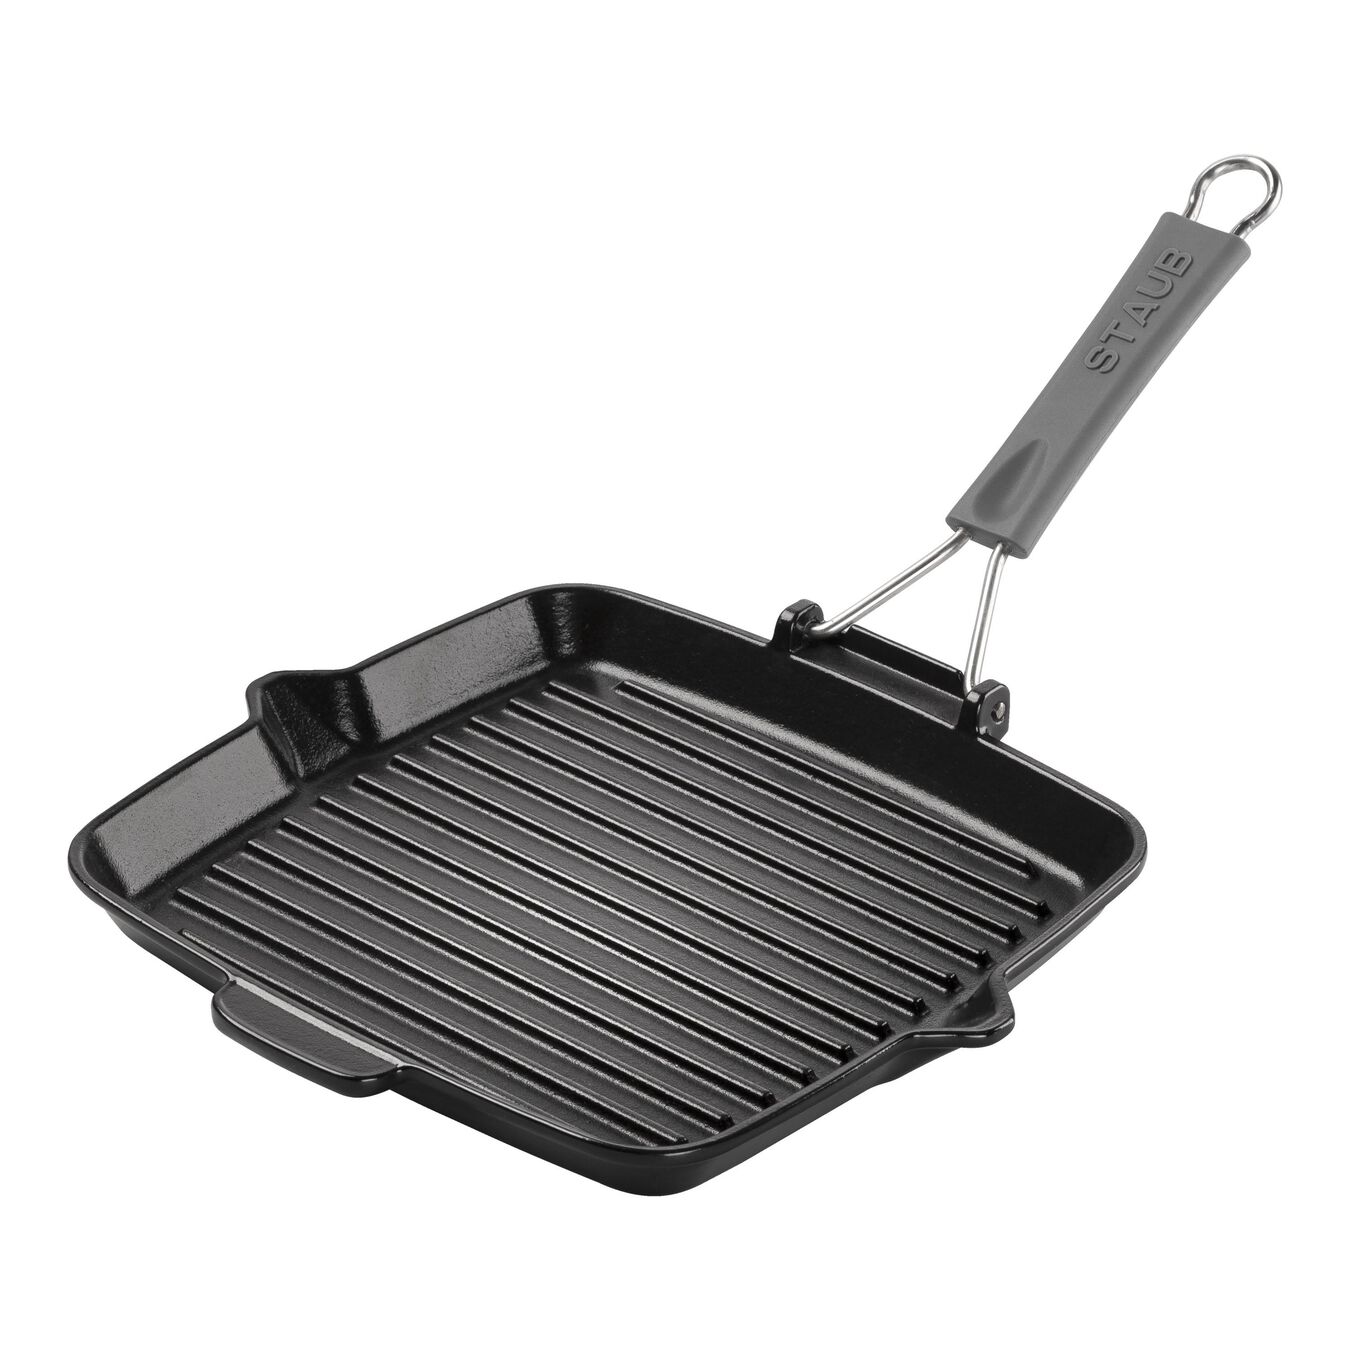 24 x 24 cm square Cast iron Grill pan with pouring spout black,,large 1